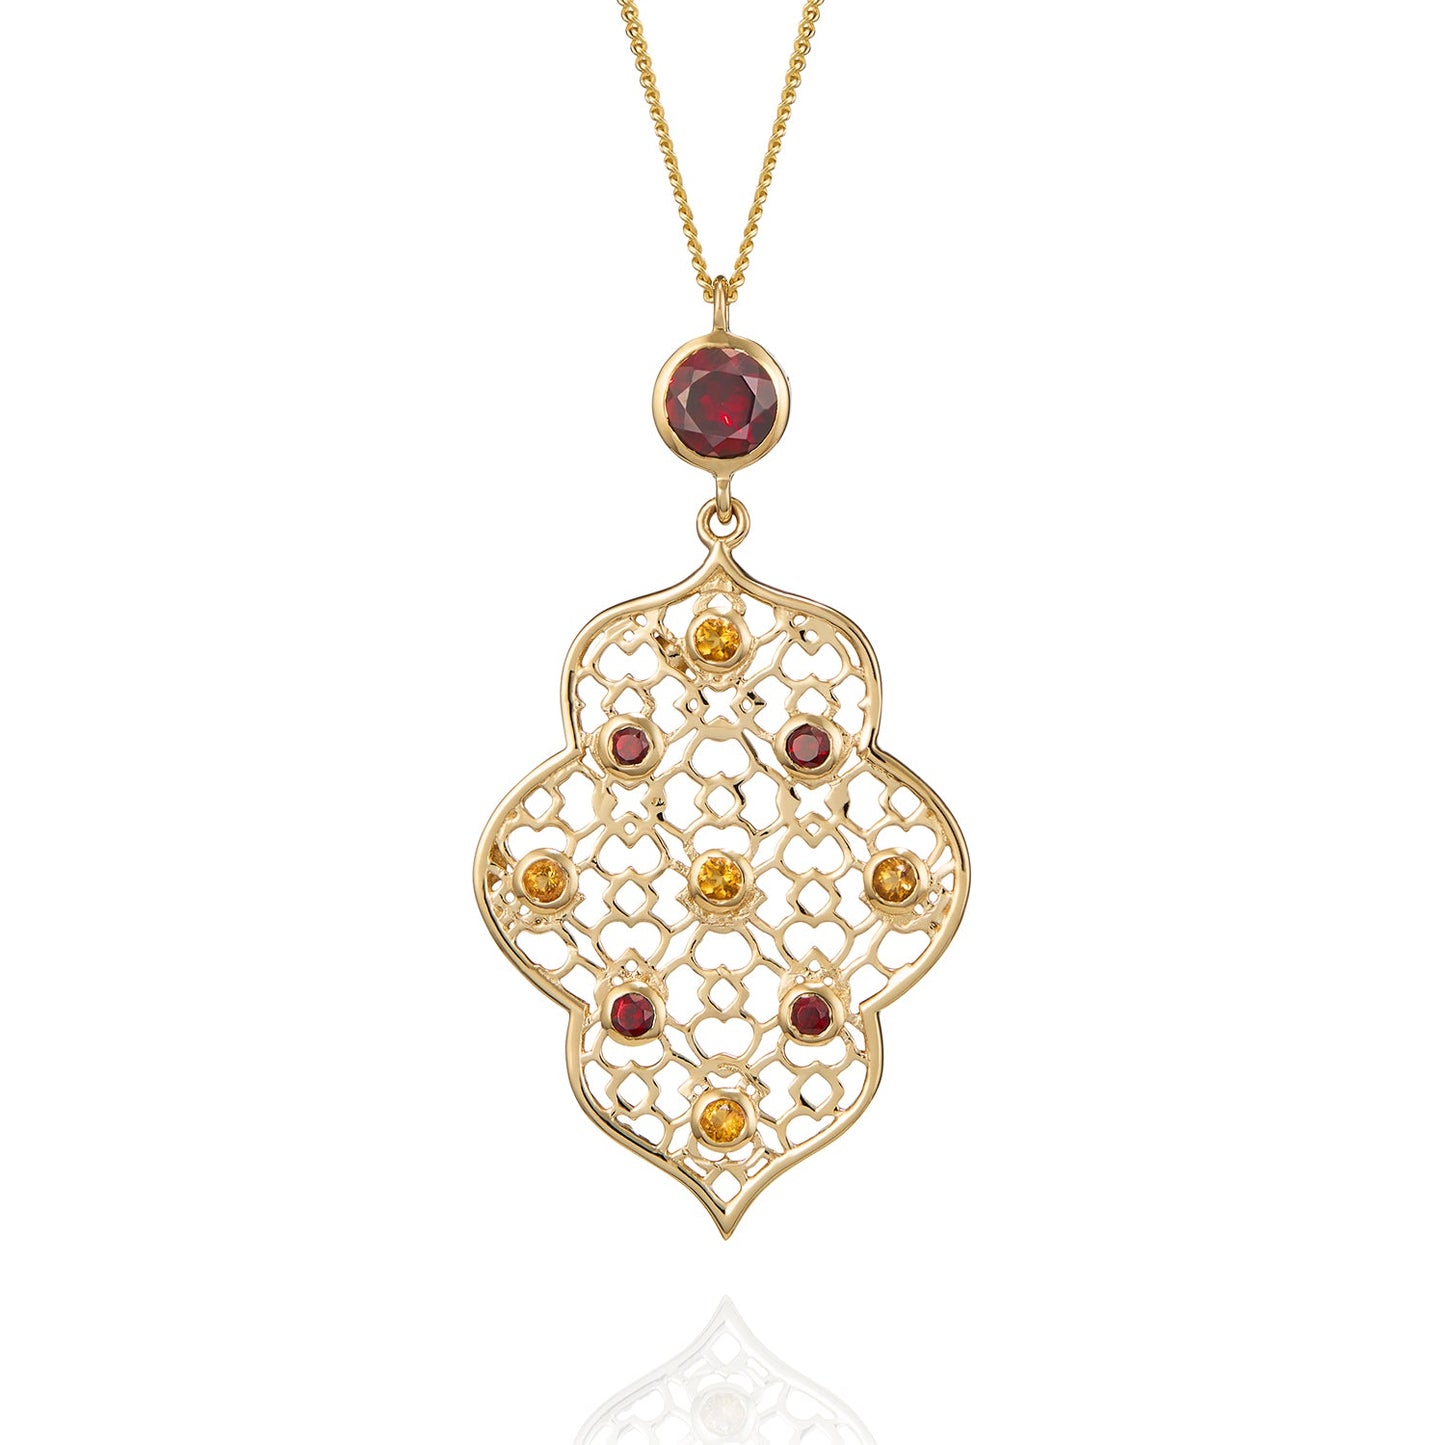 Gold Filigree Necklace with Garnet and Citrine